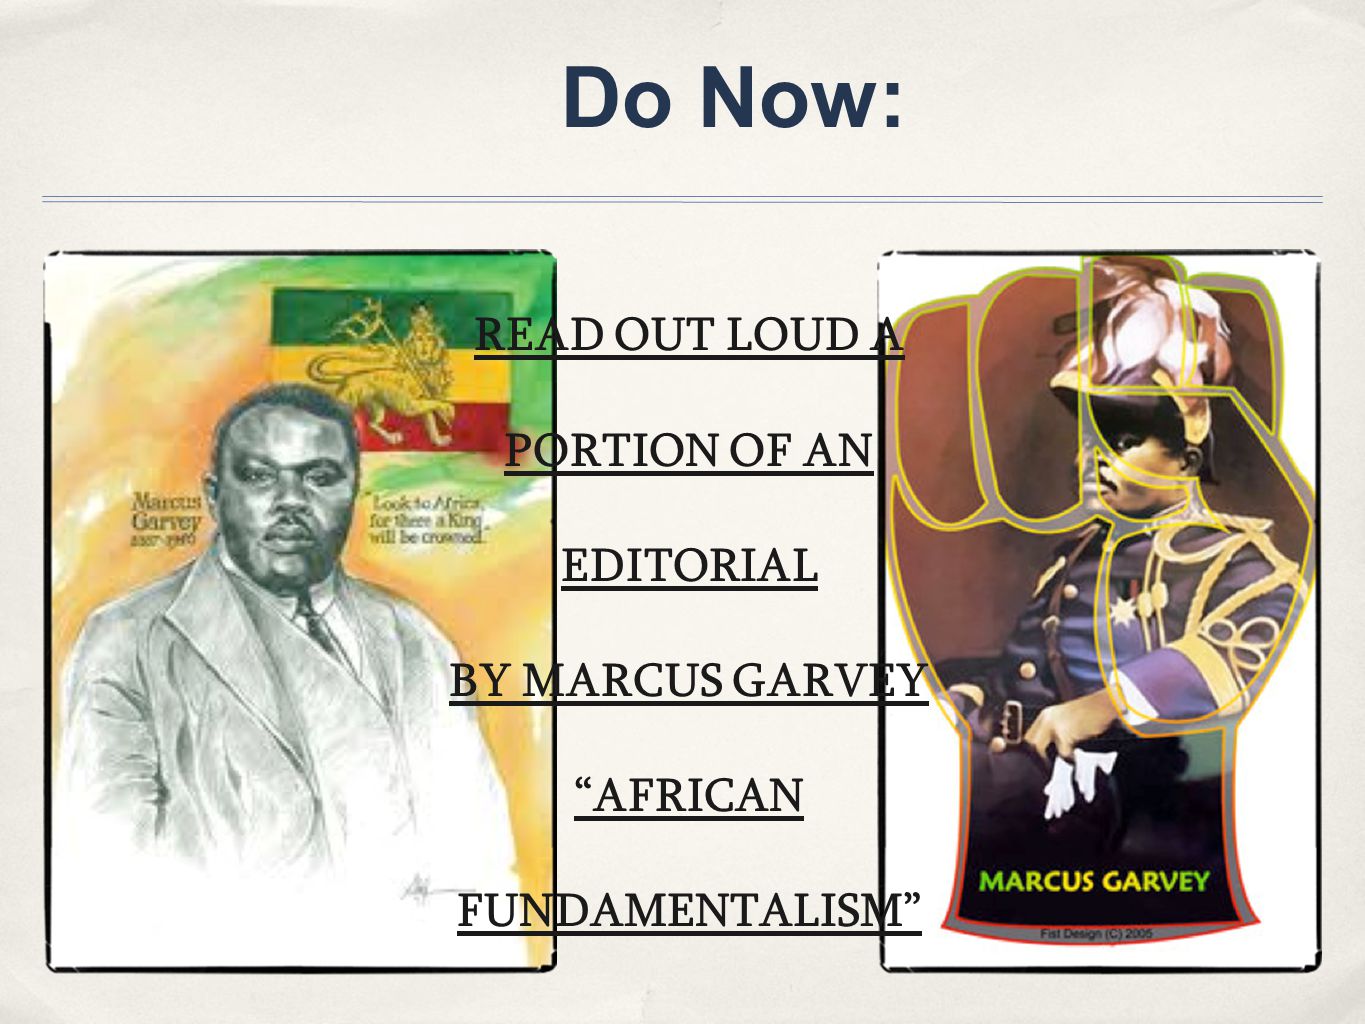 READ OUT LOUD A PORTION OF AN EDITORIAL AFRICAN FUNDAMENTALISM